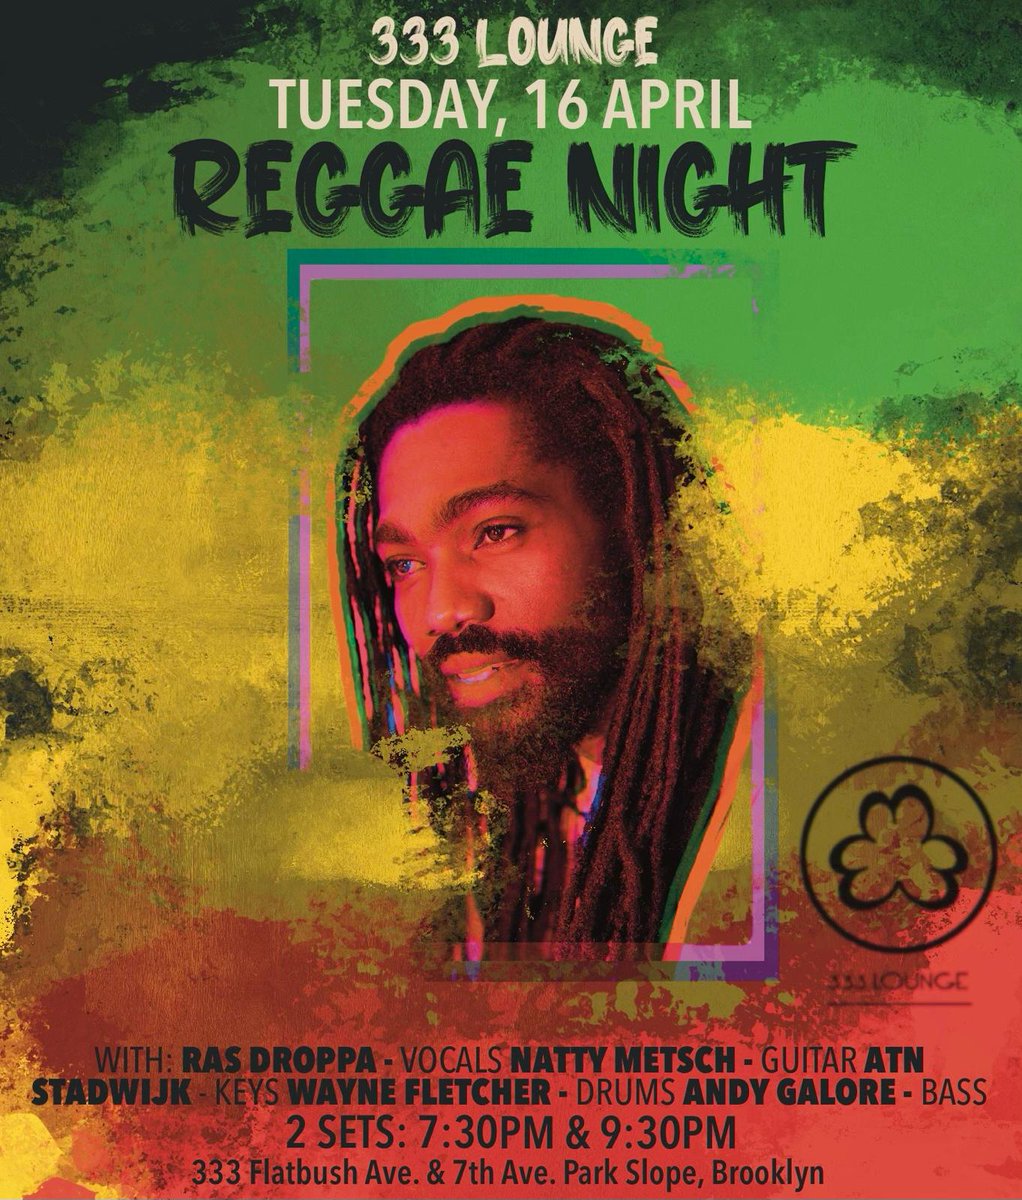 TONIGHT!  Tuesday, April 16th, join us at 333 Lounge in Brooklyn for 'Reggae Night' featuring Ras Droppa!  Located at 333 Flatbush Ave & 7th Ave., in Brooklyn.  Two Sets:  7:30pm and 9:30pm.  See you There!  #rasdroppa #rasdroppamusic #reggaenight #parkslope 
Follow @RasDroppa